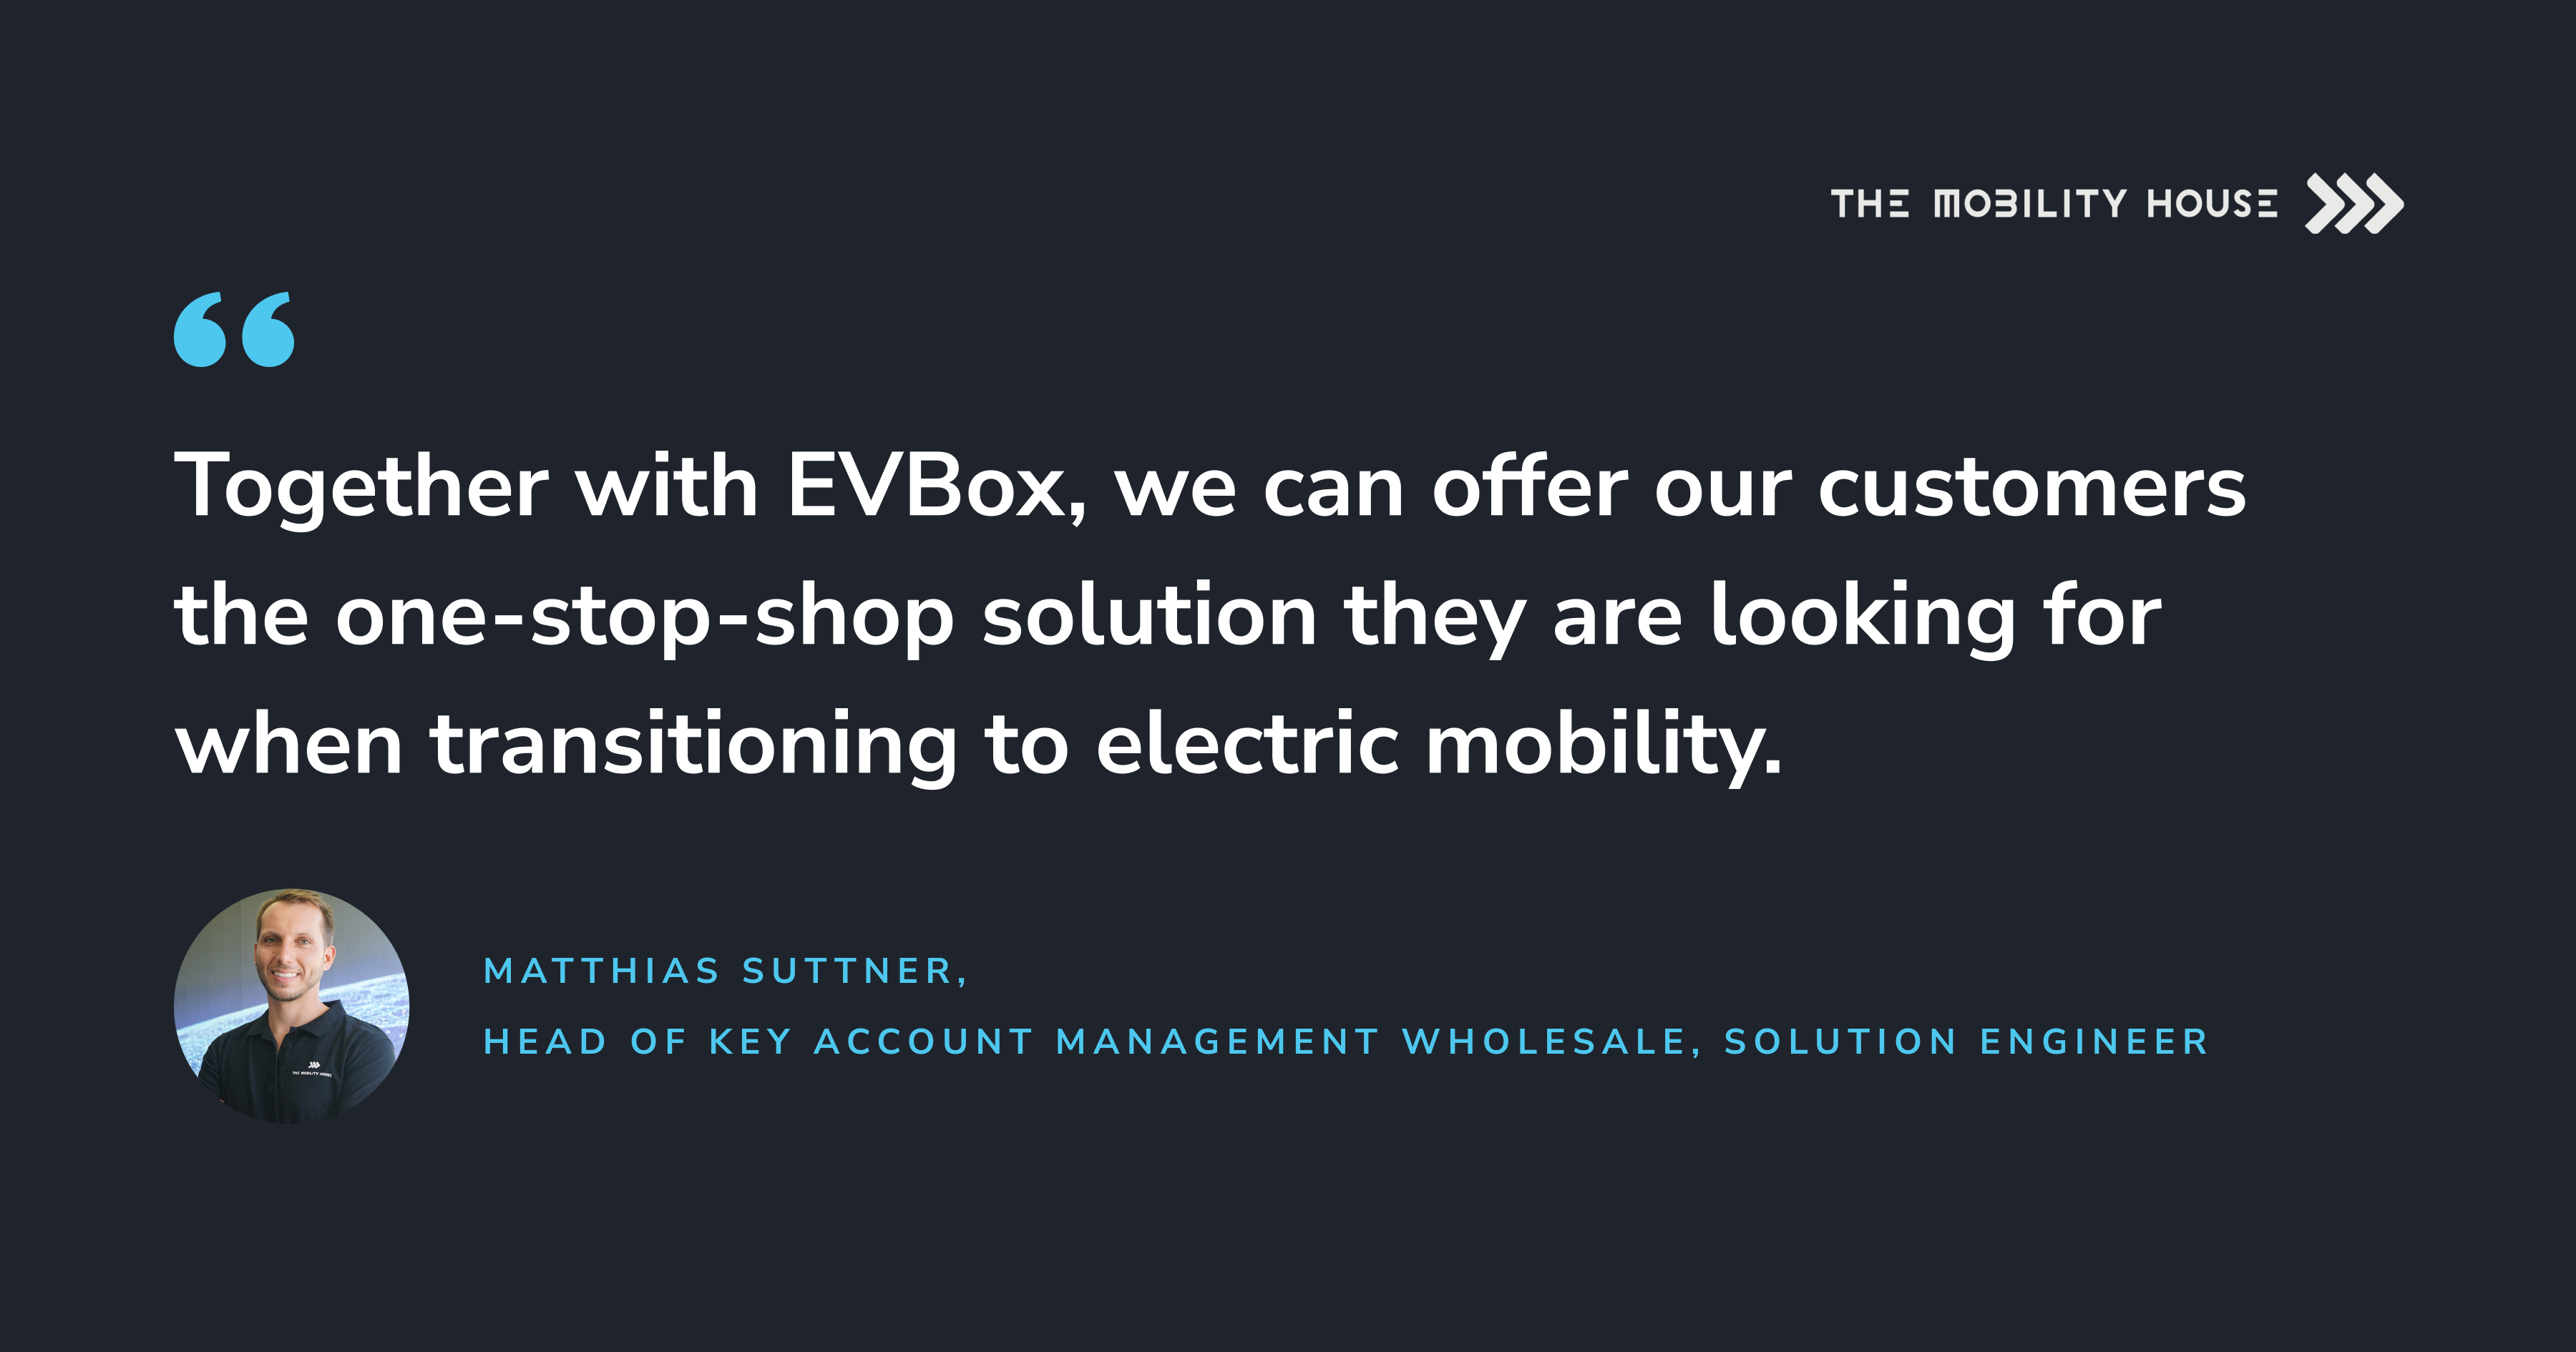 A quote from Matthias Suttner, Head of Key Account Management Wholesale at The Mobility House. “Together with EVBox, we can offer our customers the one-stop-shop solution they are looking for when transitioning to electric mobility.”